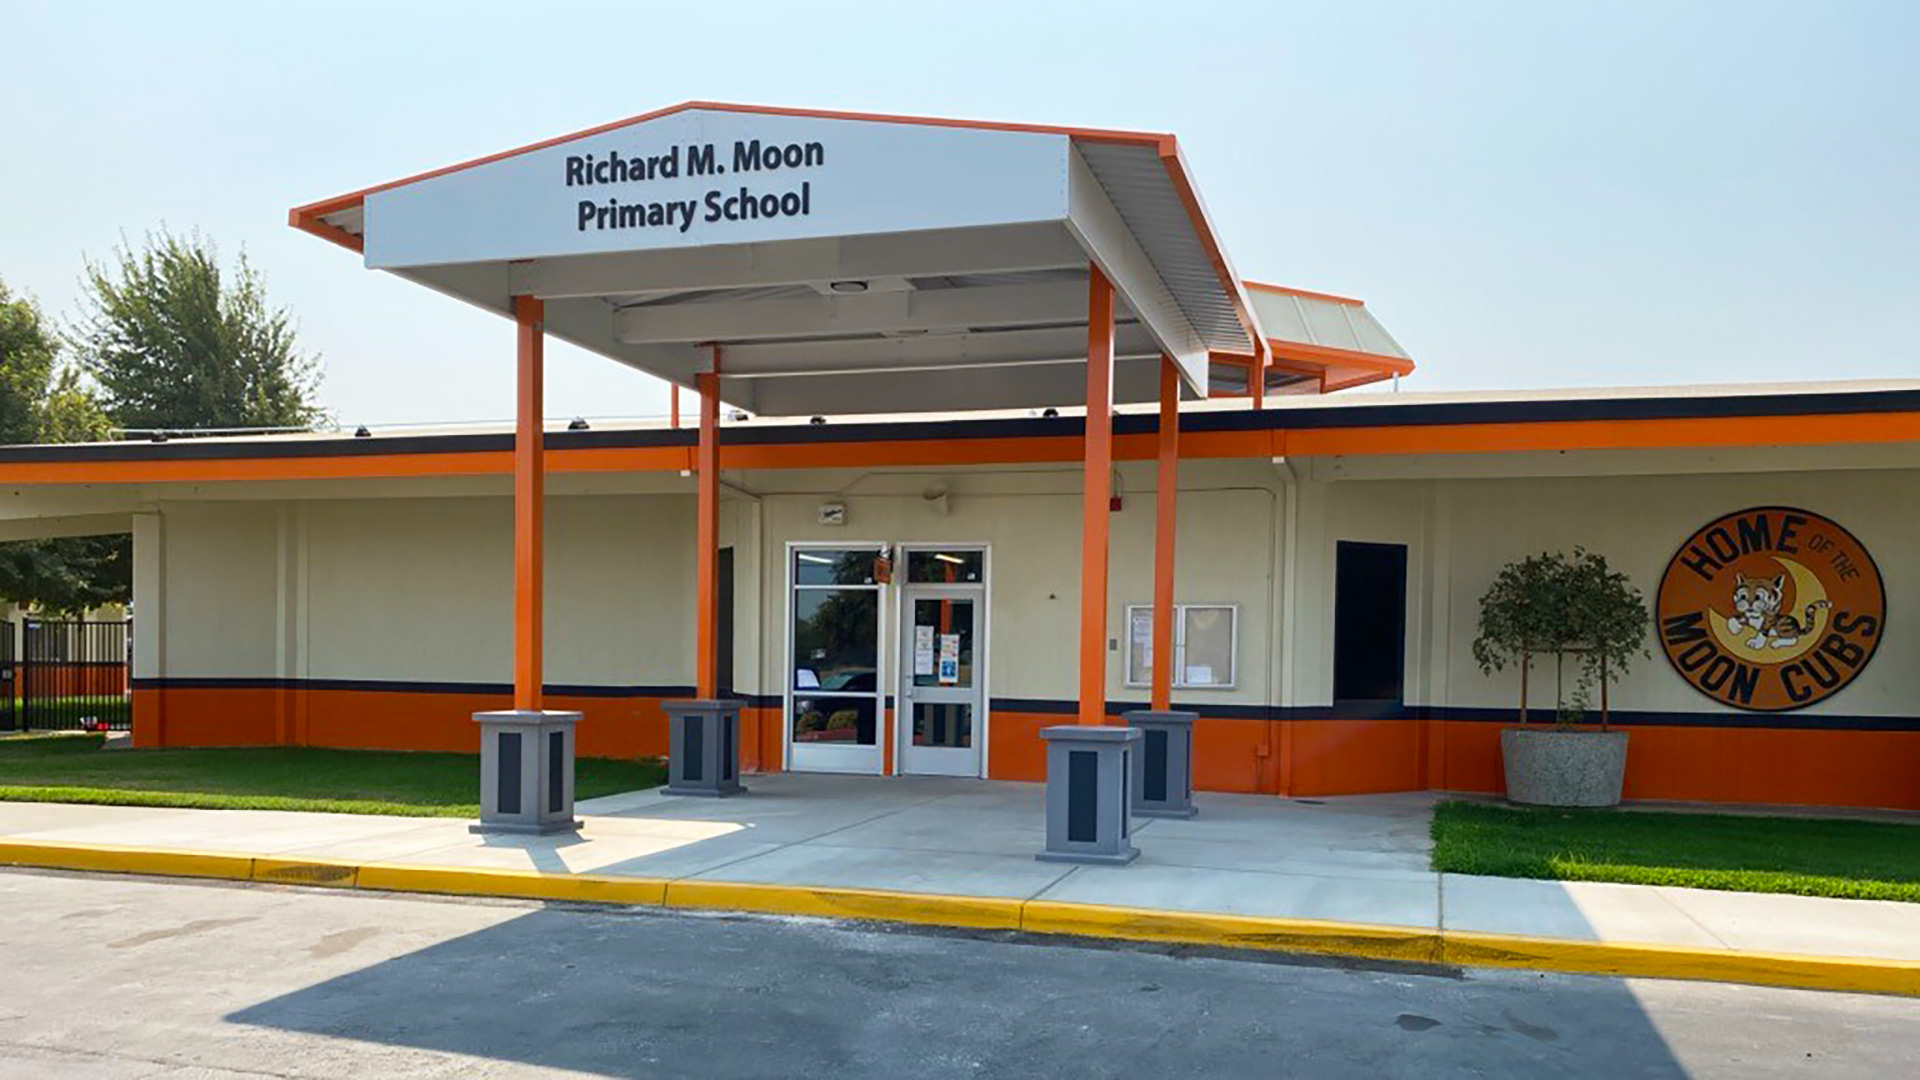 New orange and white painted building behind orange and white entry shade structure with the school name in lettering,